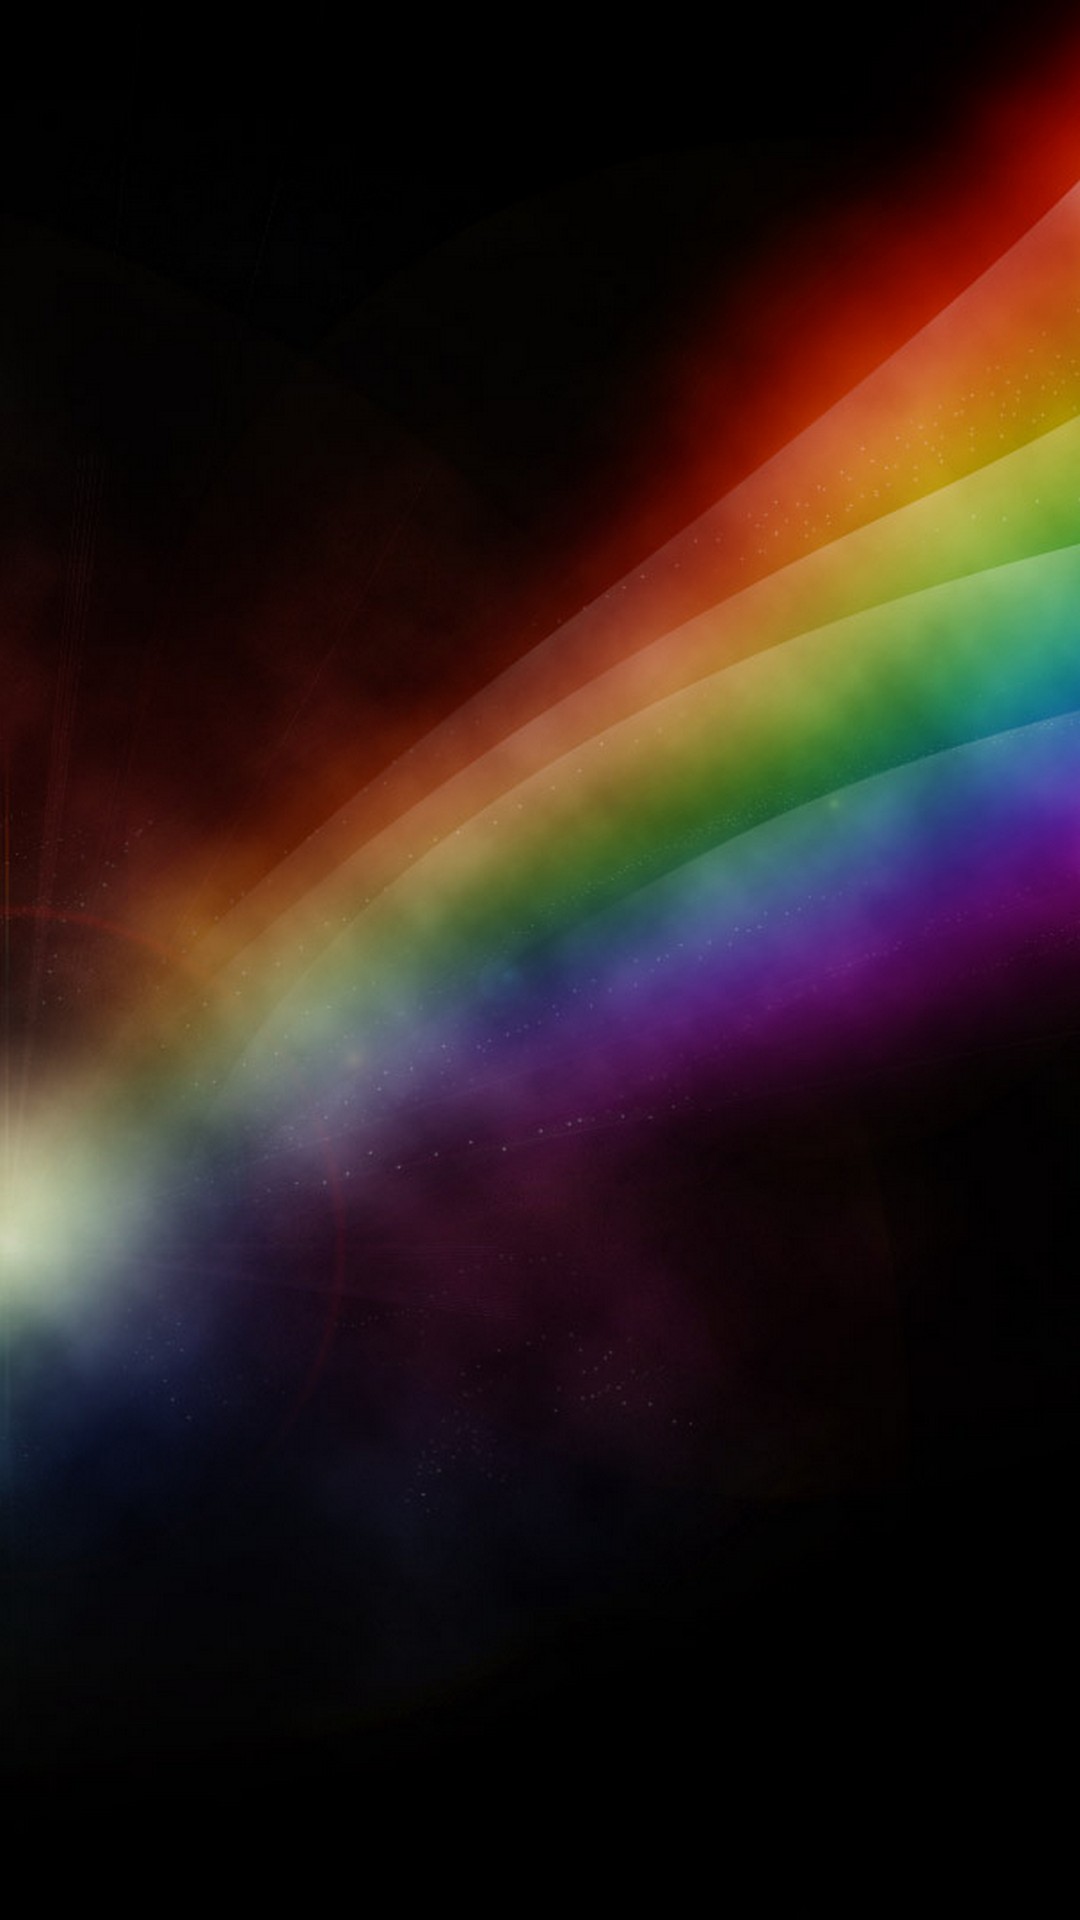 Rainbow Wallpaper For Android with resolution 1080X1920 pixel. You can make this wallpaper for your Android backgrounds, Tablet, Smartphones Screensavers and Mobile Phone Lock Screen